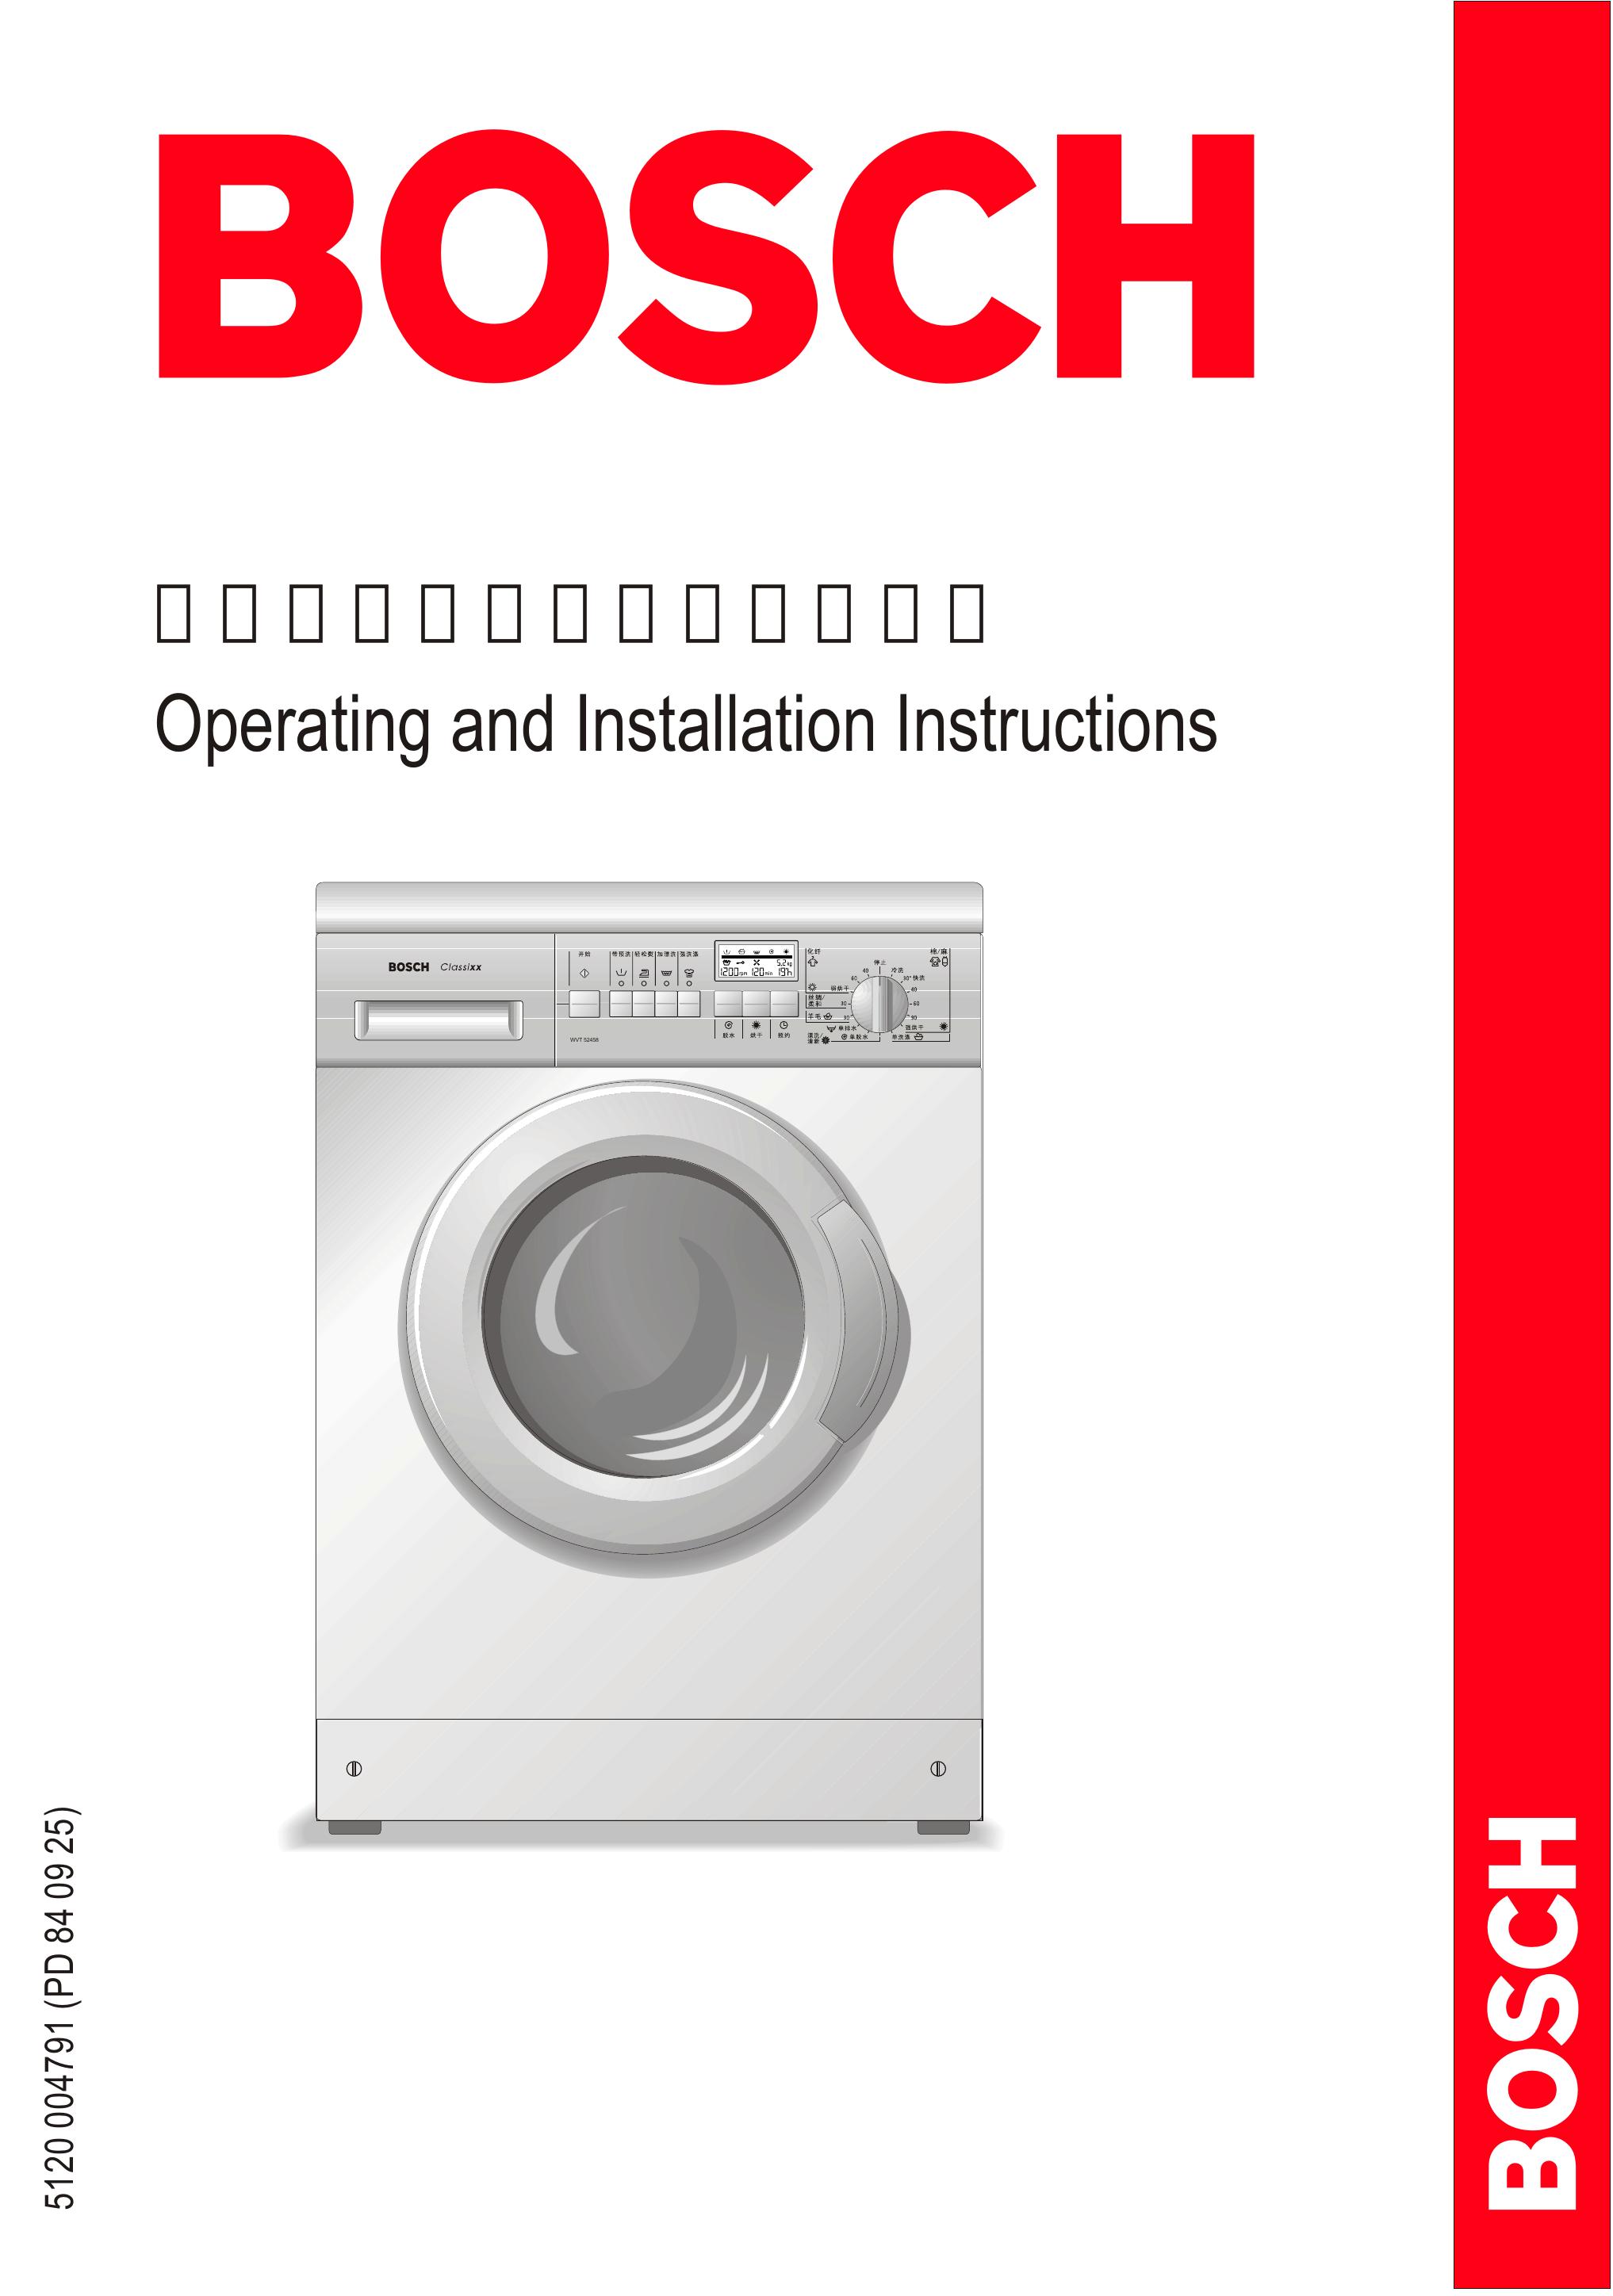 Bosch Power Tools WVT 52458 Washer User Manual